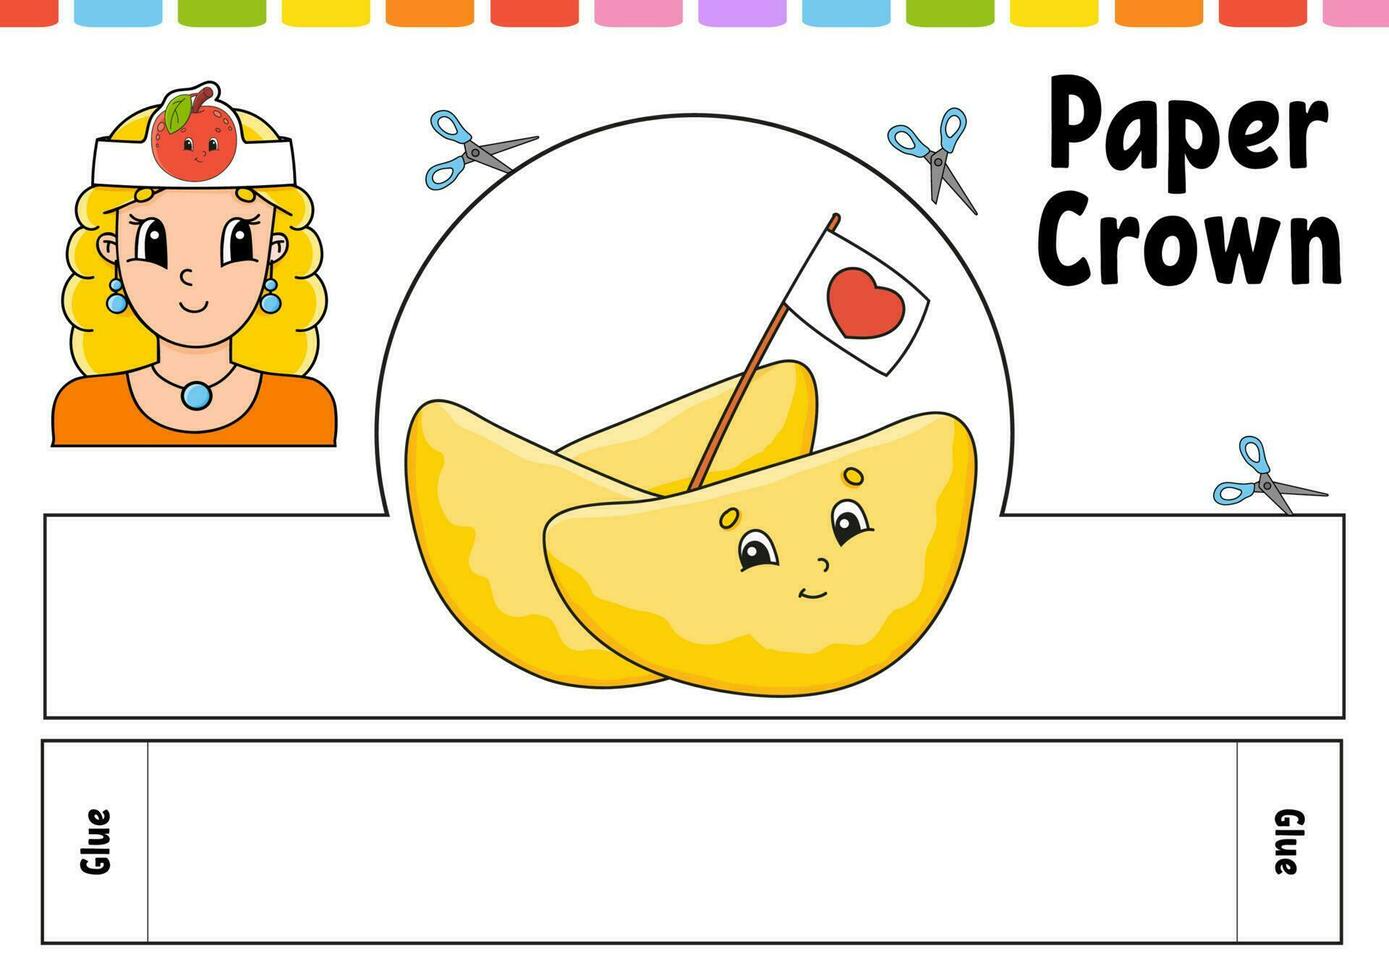 Paper crown template for kids. For games, pies, birthdays, holidays. With a cute cartoon character. Isolated on a white background. Suitable for printing. Vector illustration.